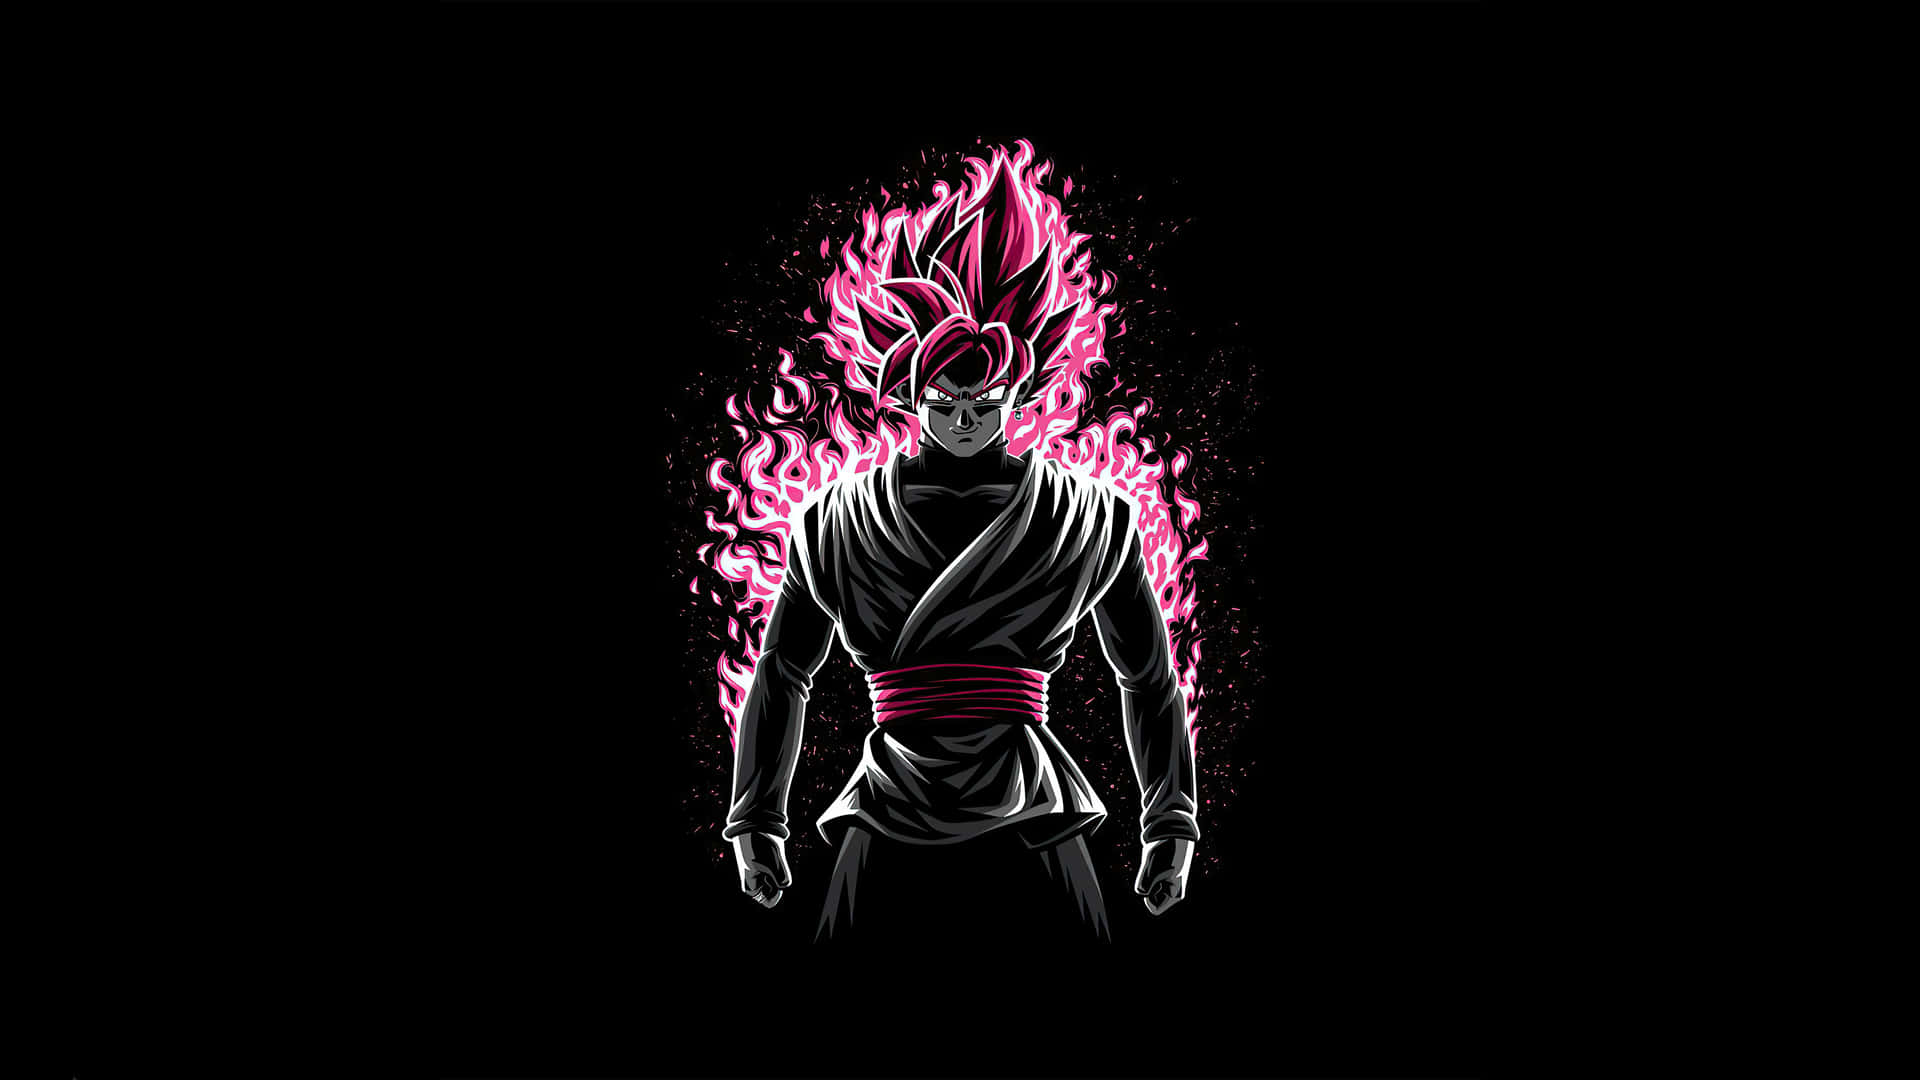 Unleash your inner Super Saiyan with the Dragon Ball Z 4K PC Wallpaper